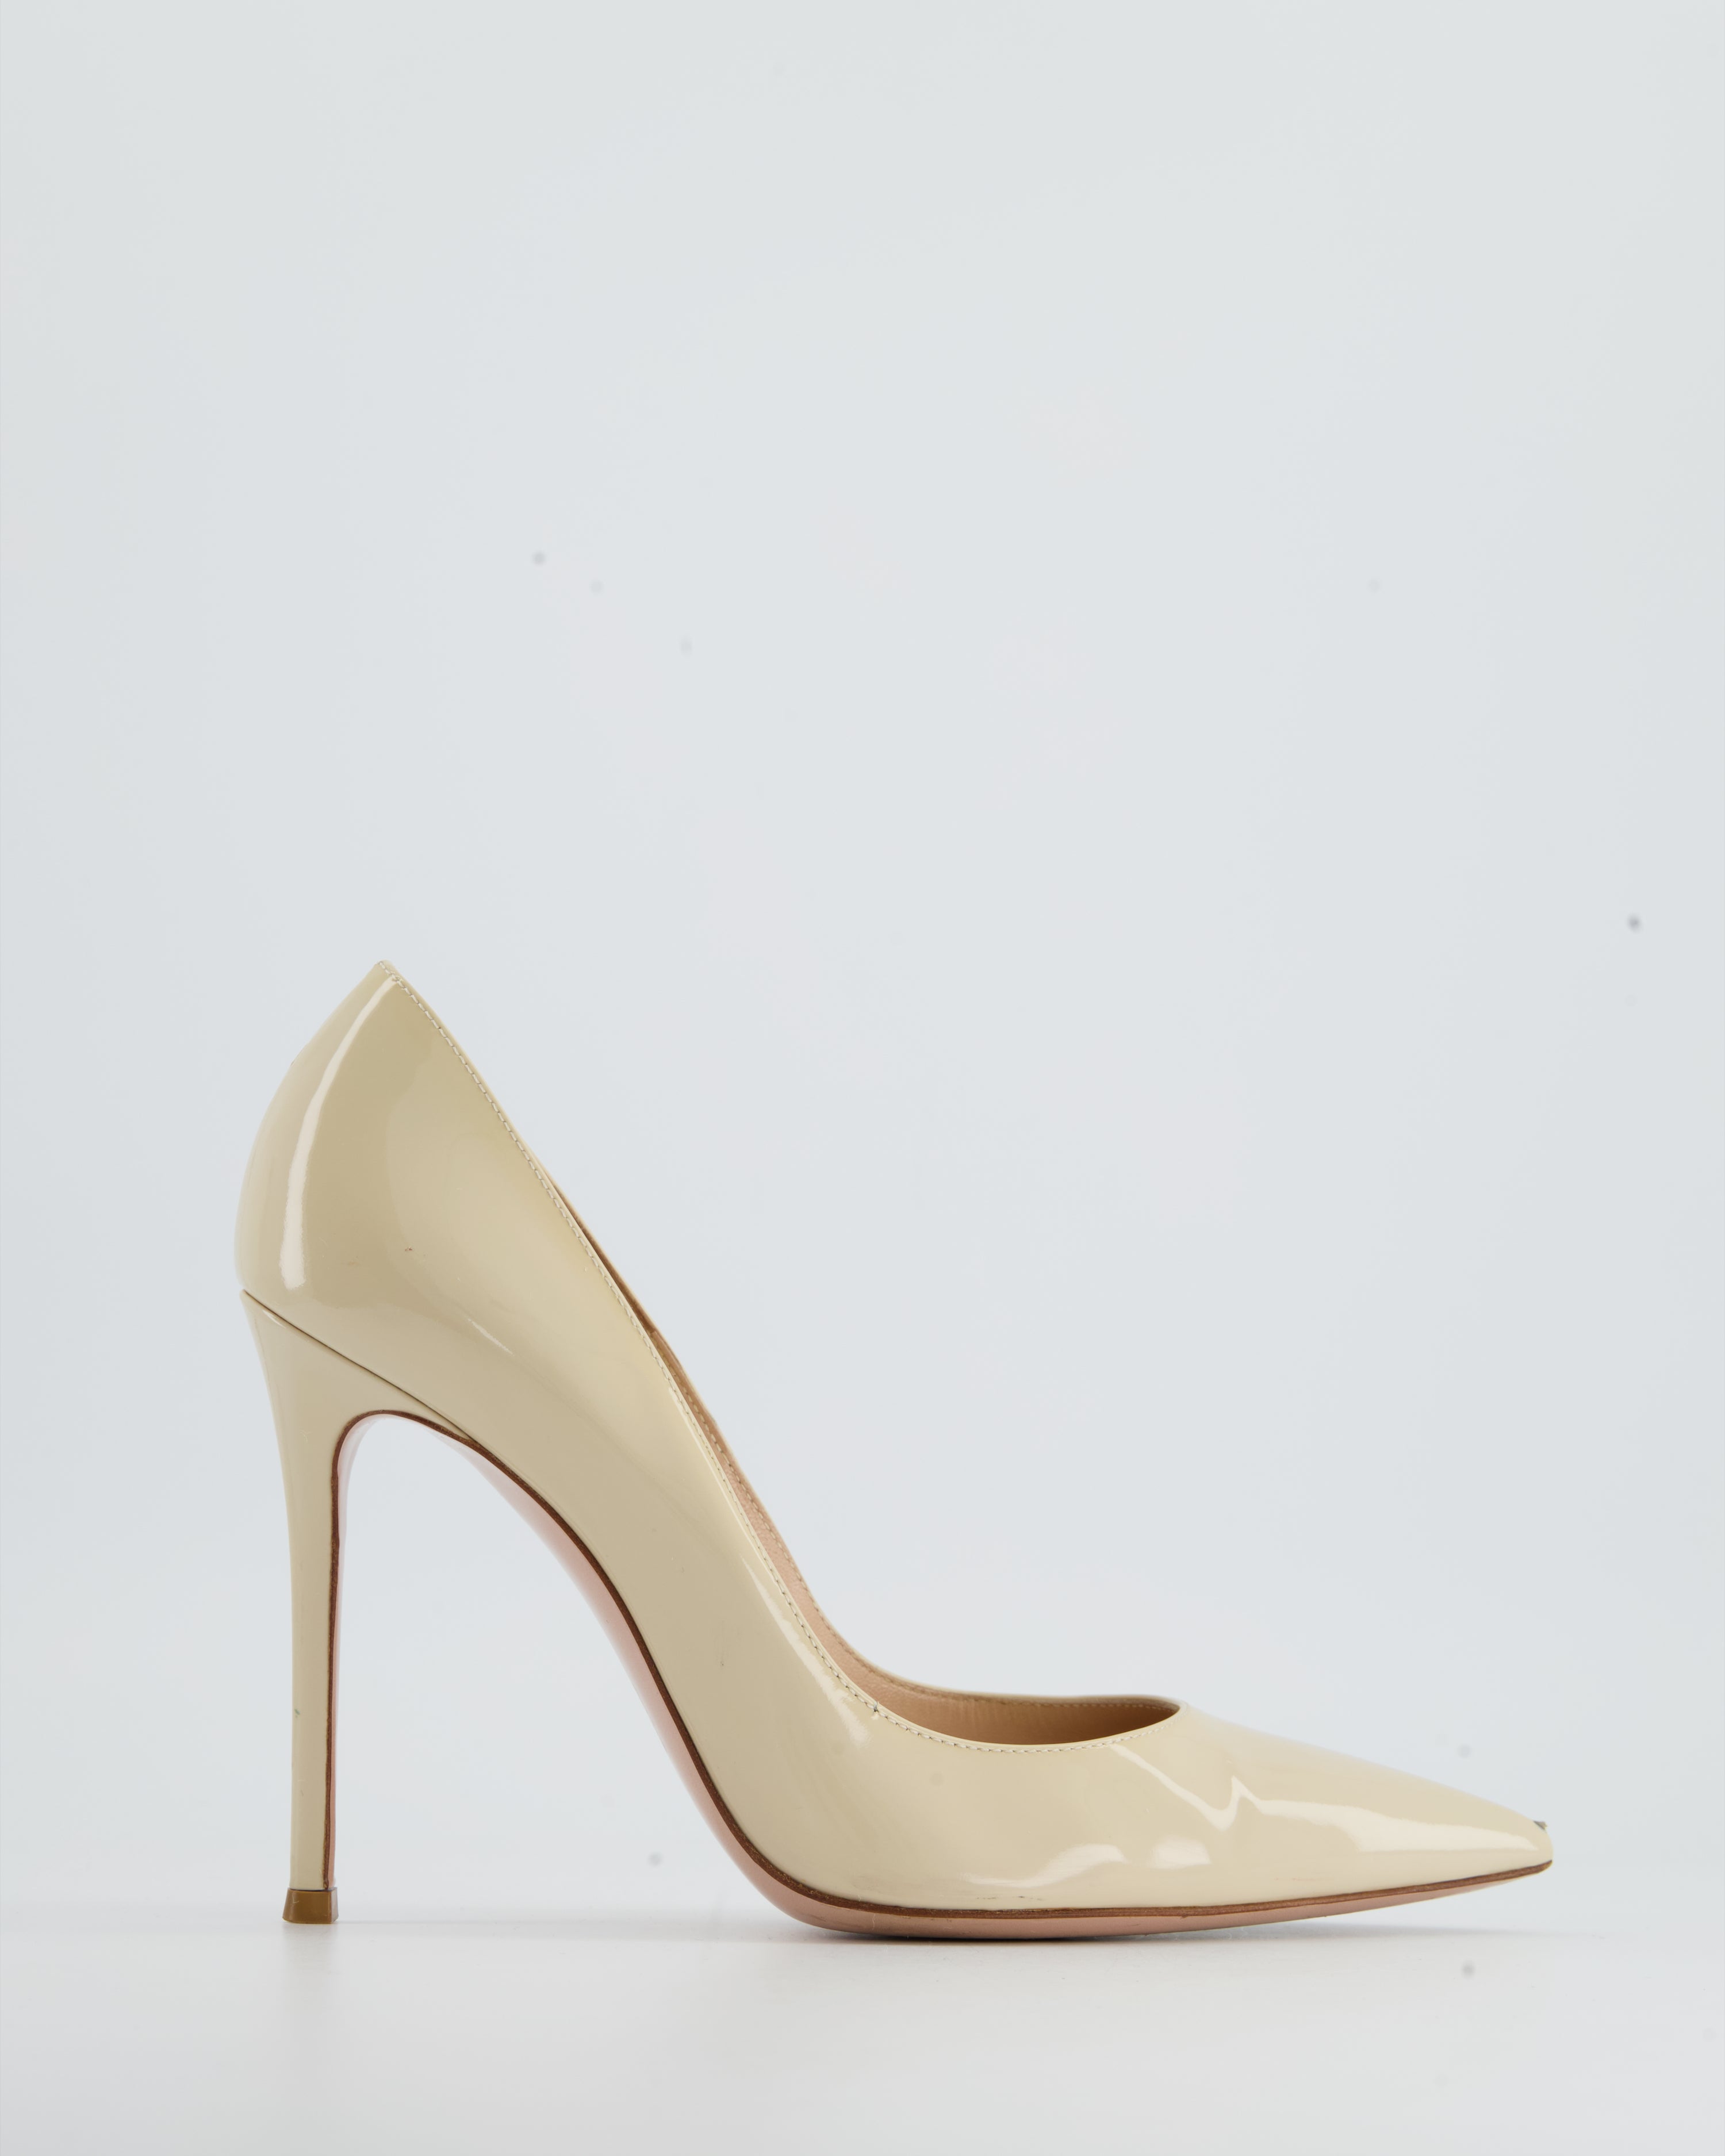 Gianvito Rossi Cream Patent Pointed-toe Court Shoes Size EU 40 – Sellier